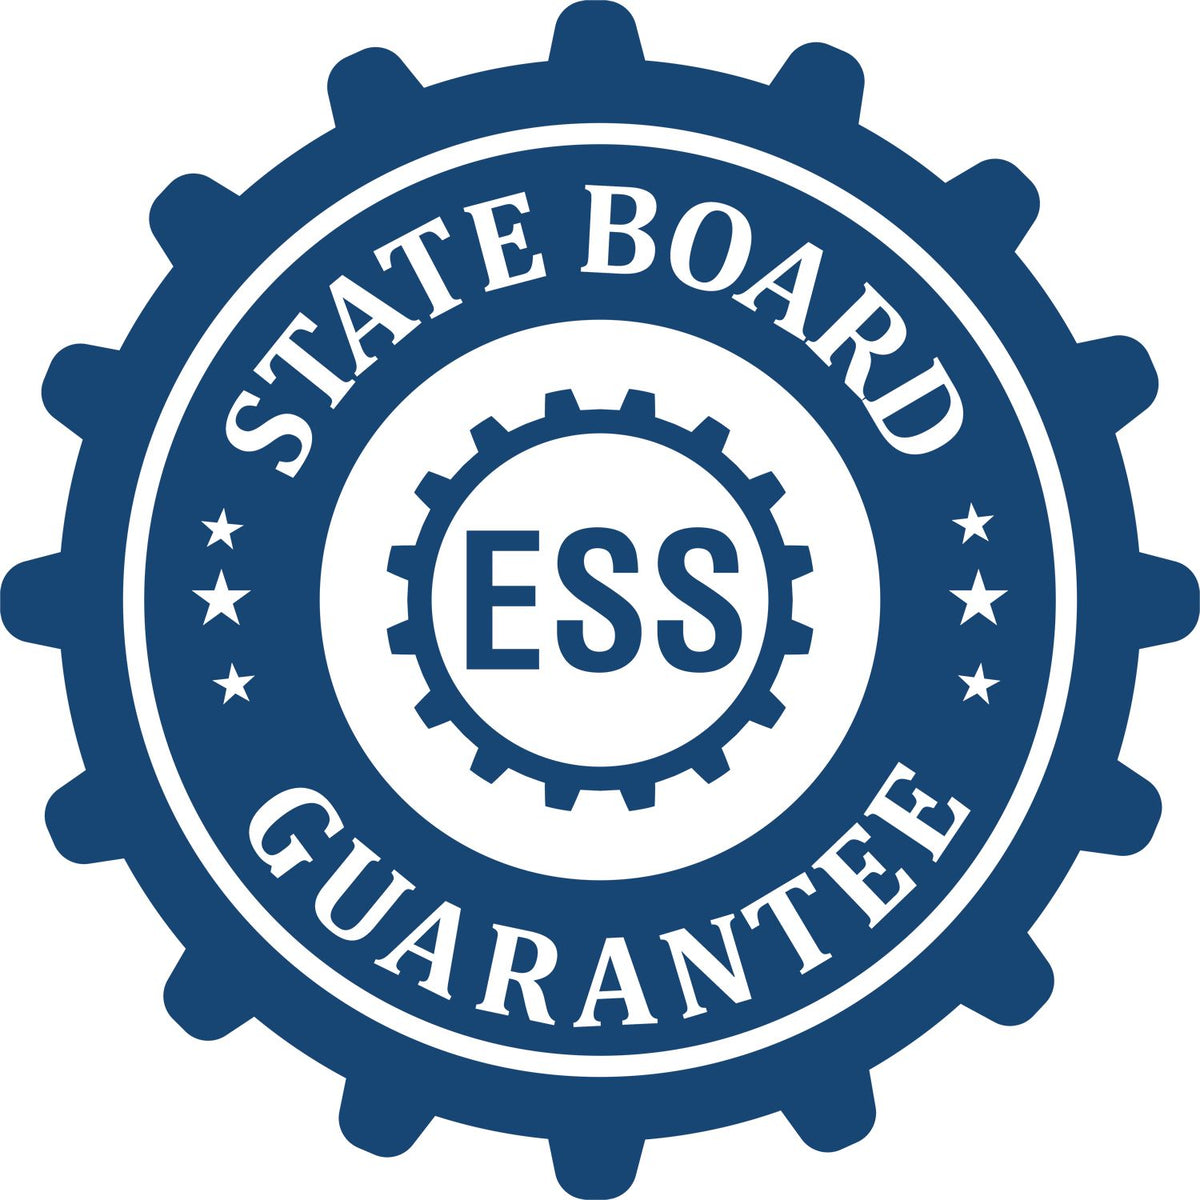 An emblem in a gear shape illustrating a state board guarantee for the State of Iowa Long Reach Architectural Embossing Seal product.